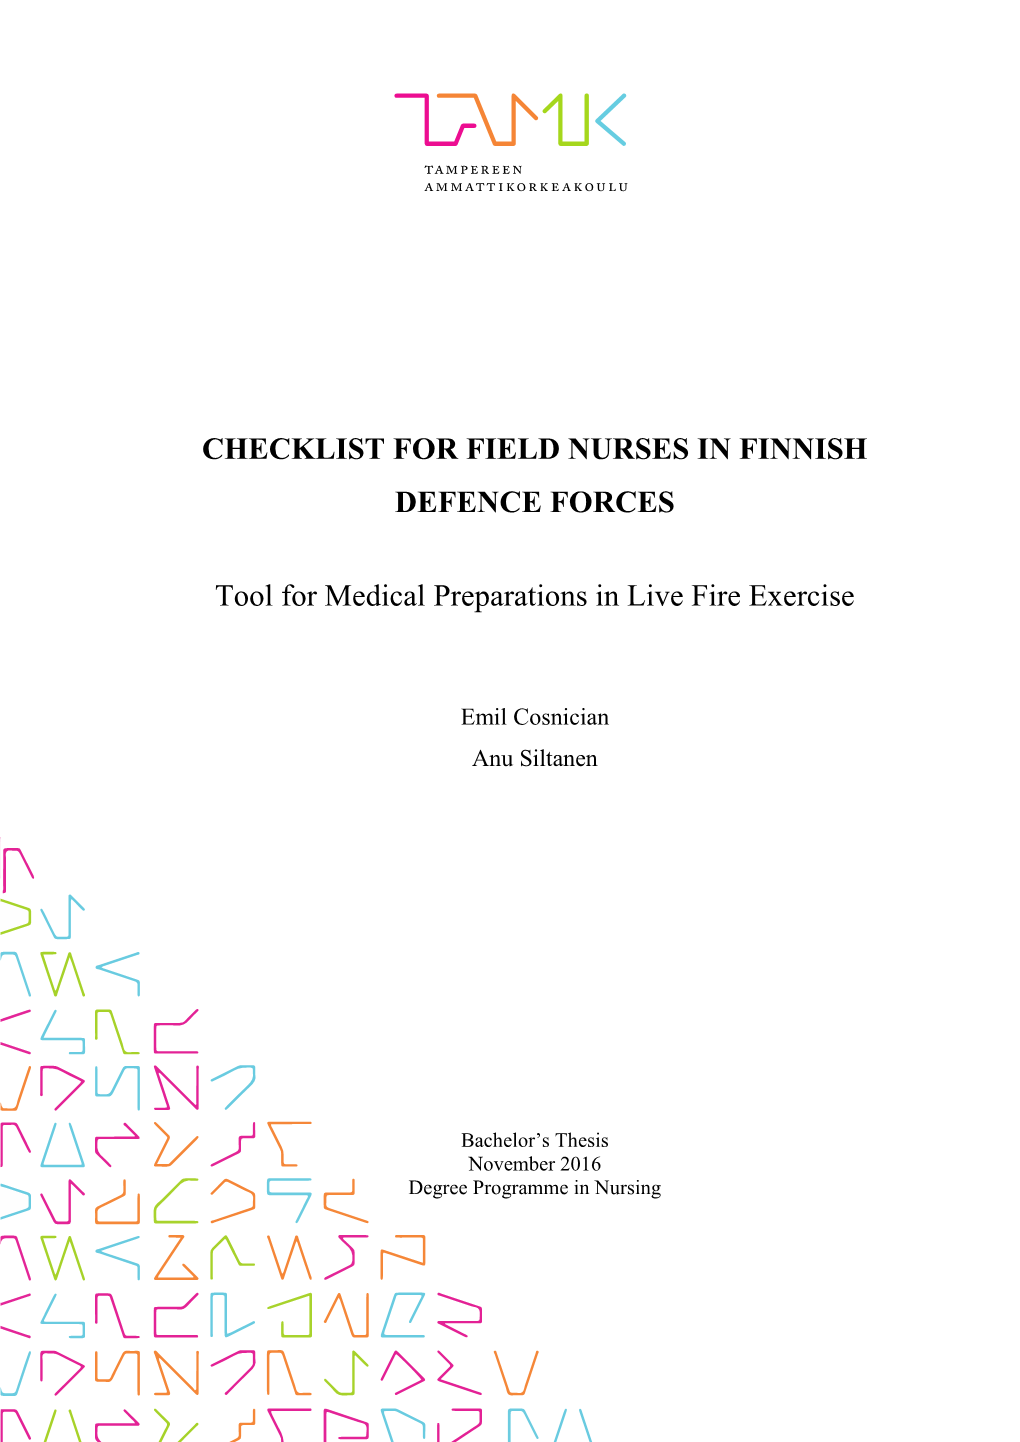 Checklist for Field Nurses in Finnish Defence Forces